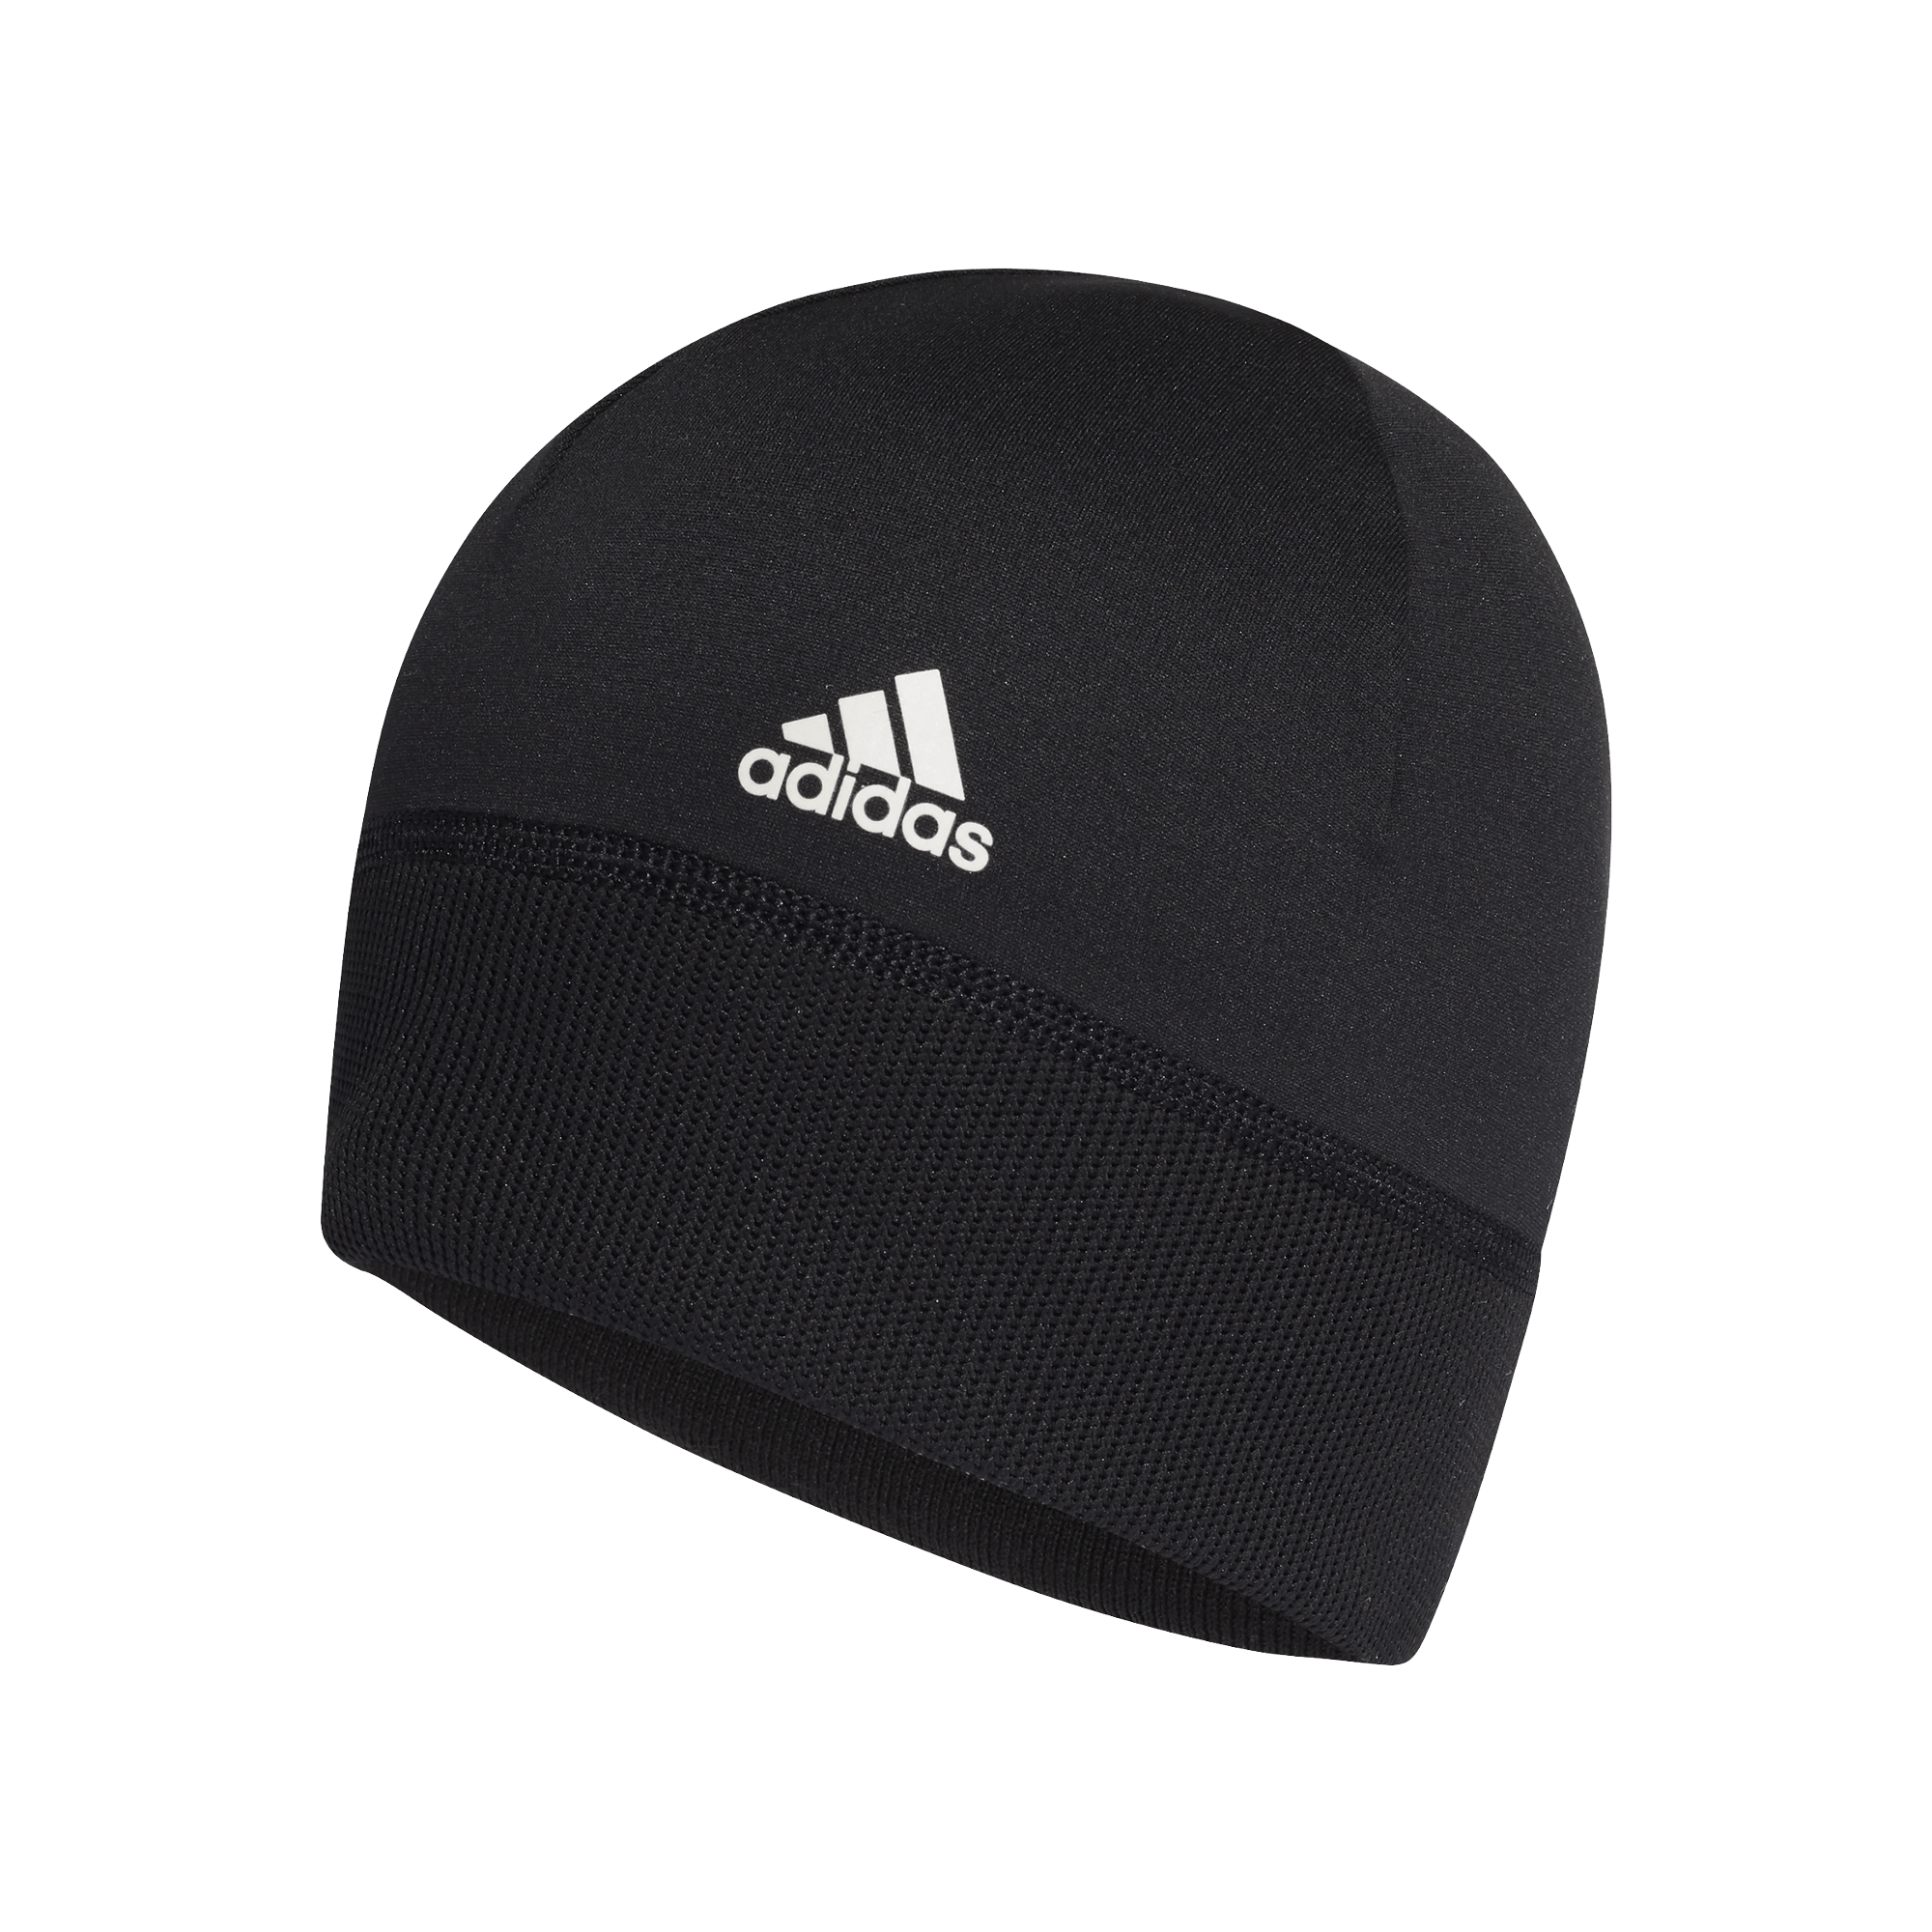 Beanie Shop Rugby | All Blacks Rugby - New Moisture World Zealand by Adidas Rugby 2021 Polyester Beanie Wicking